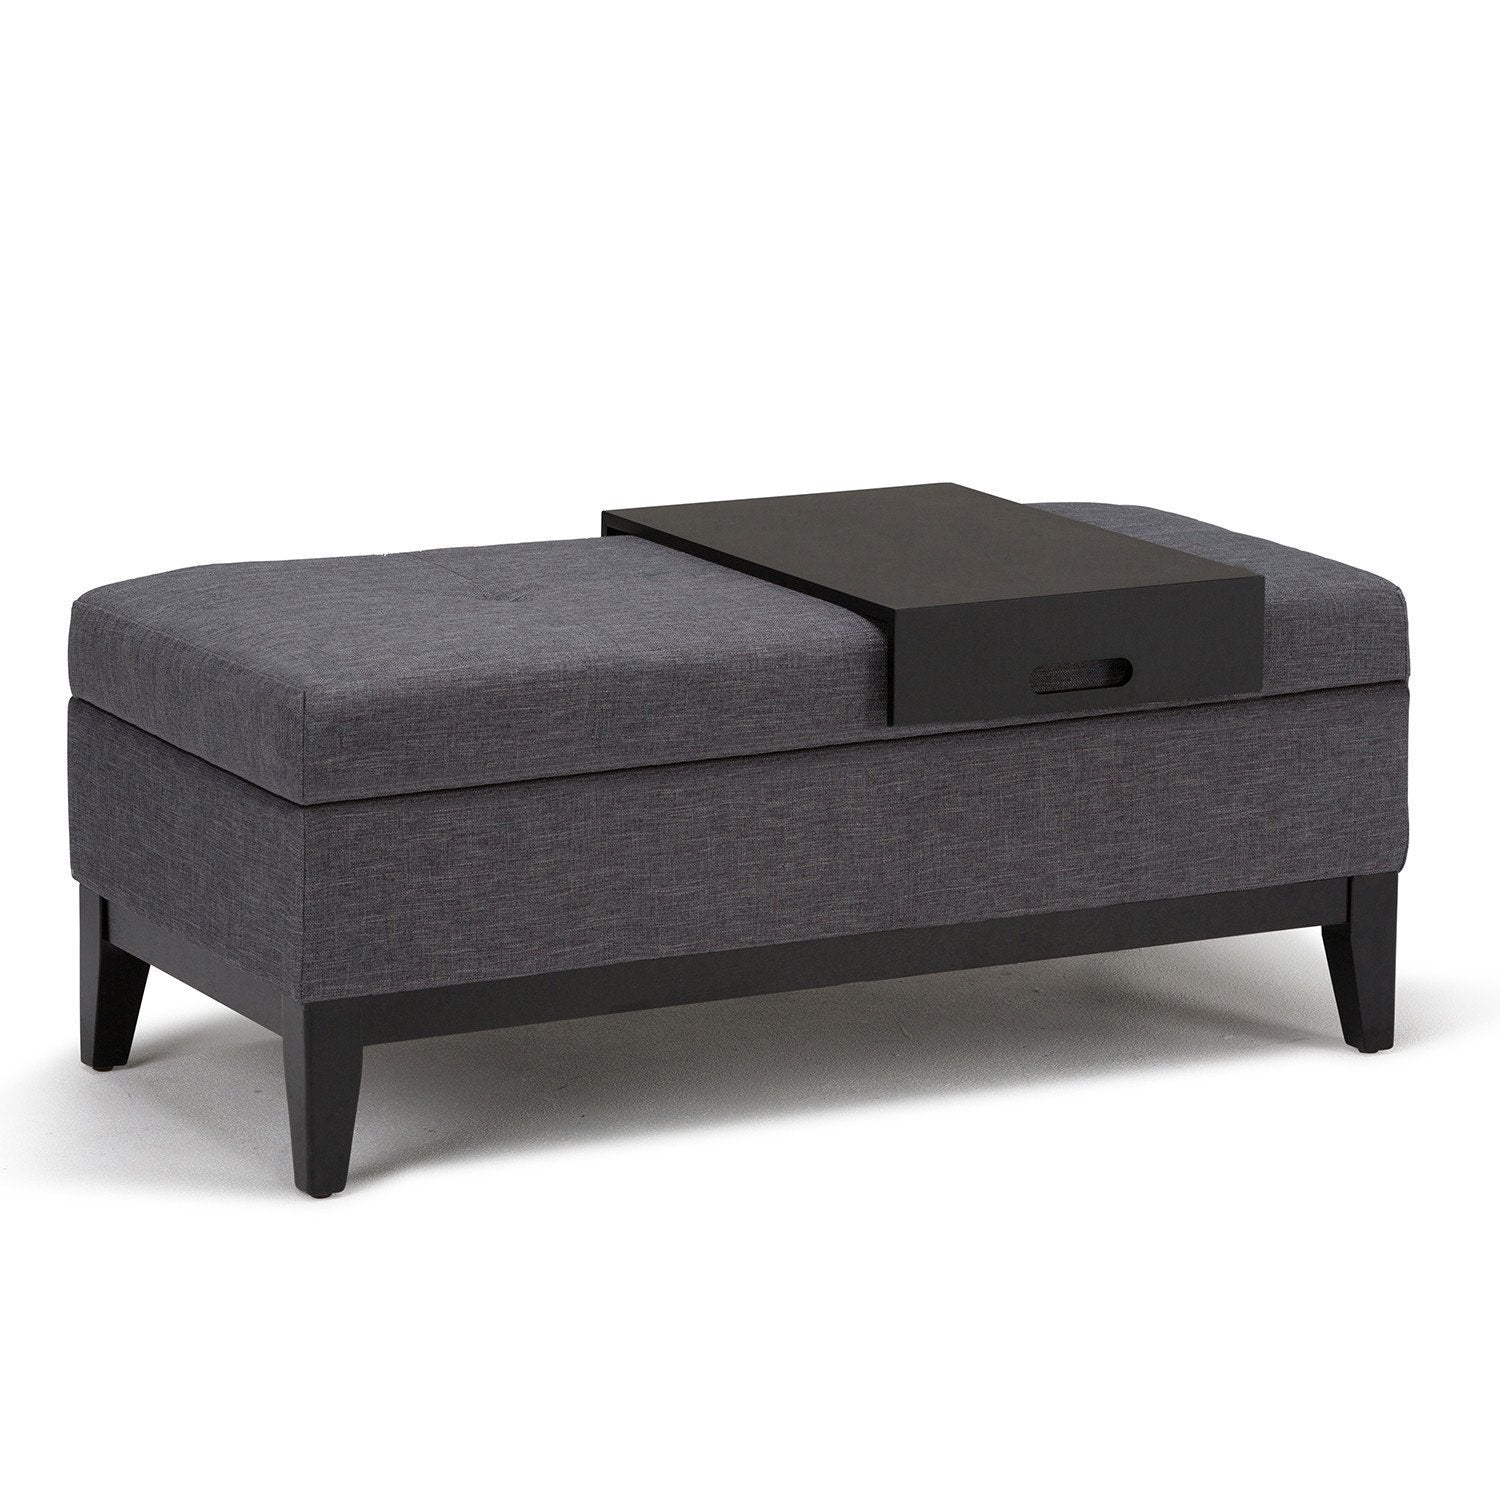 Slate Grey Linen Look Polyester Fabric | Oregon Linen Look Storage Ottoman with Tray